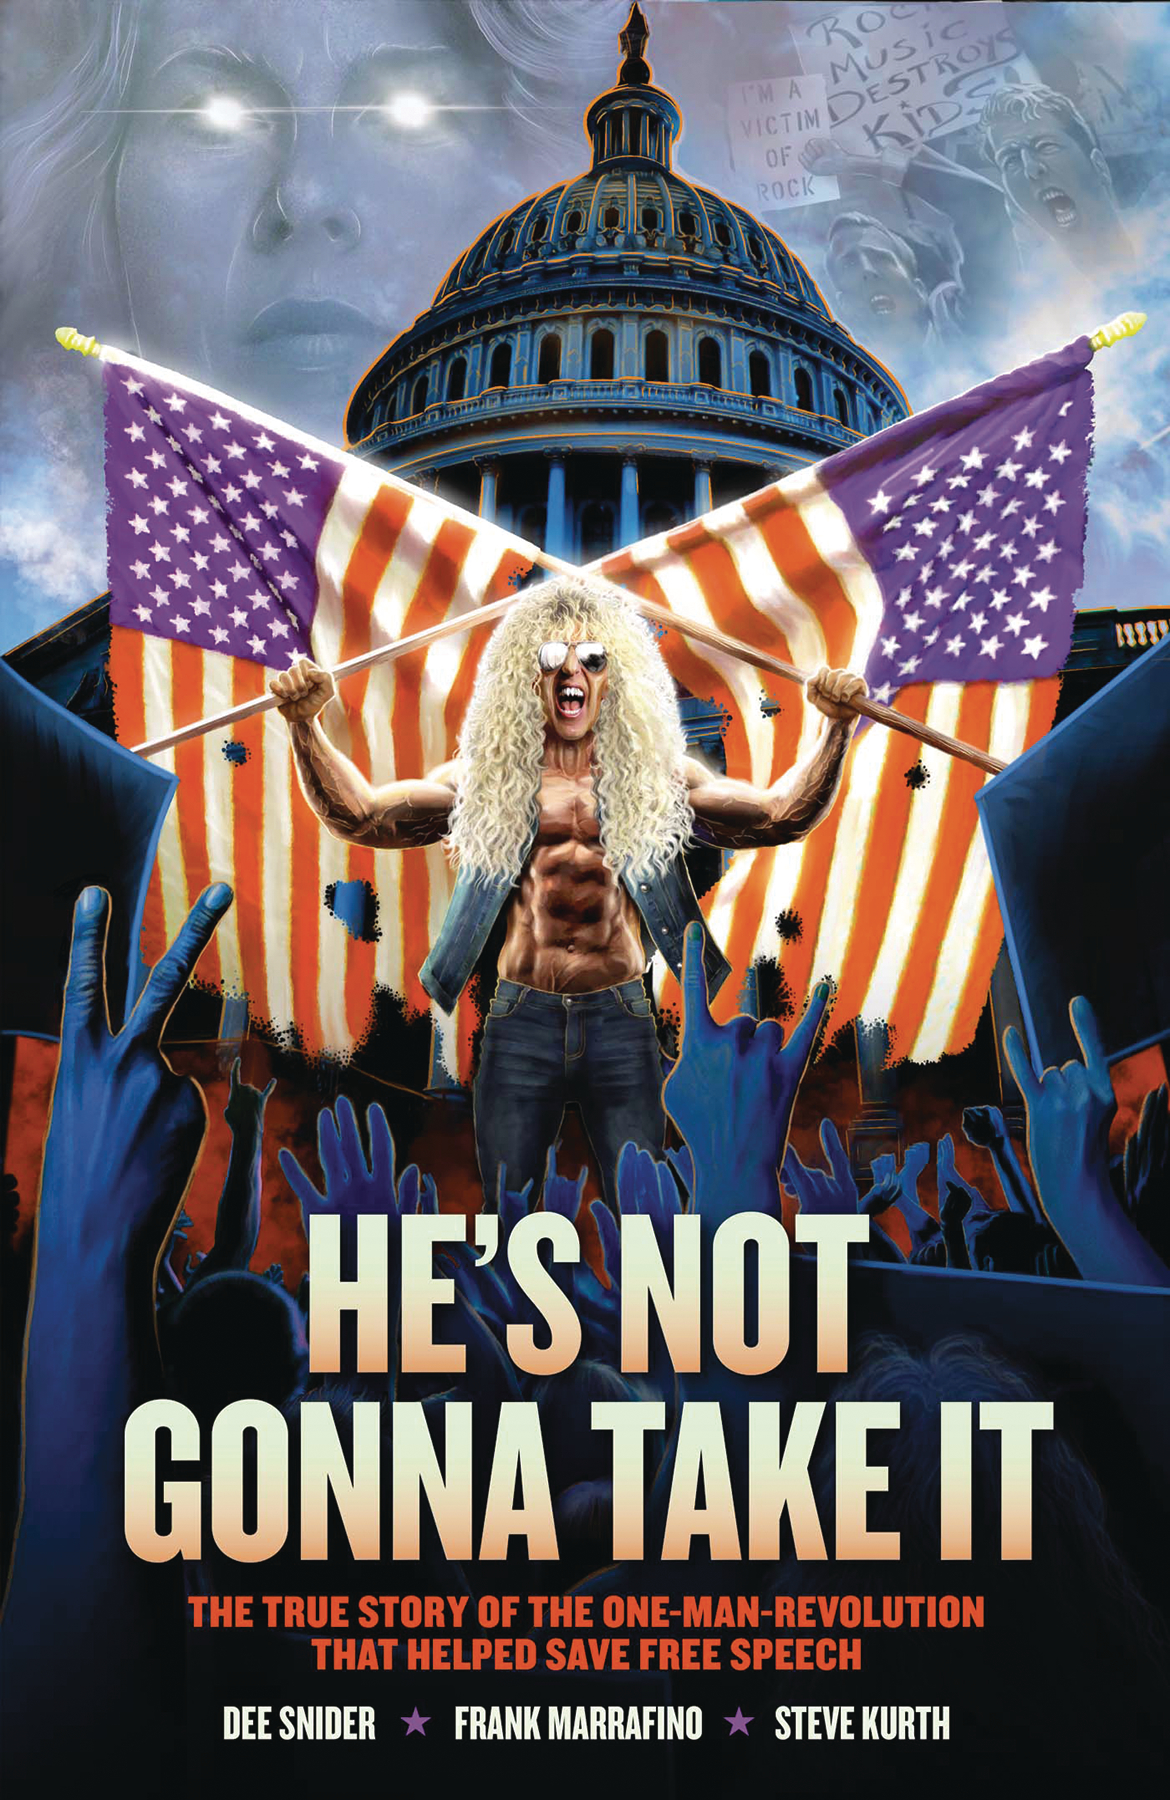 Dee Snider He's Not Gonna Take It Graphic Novel